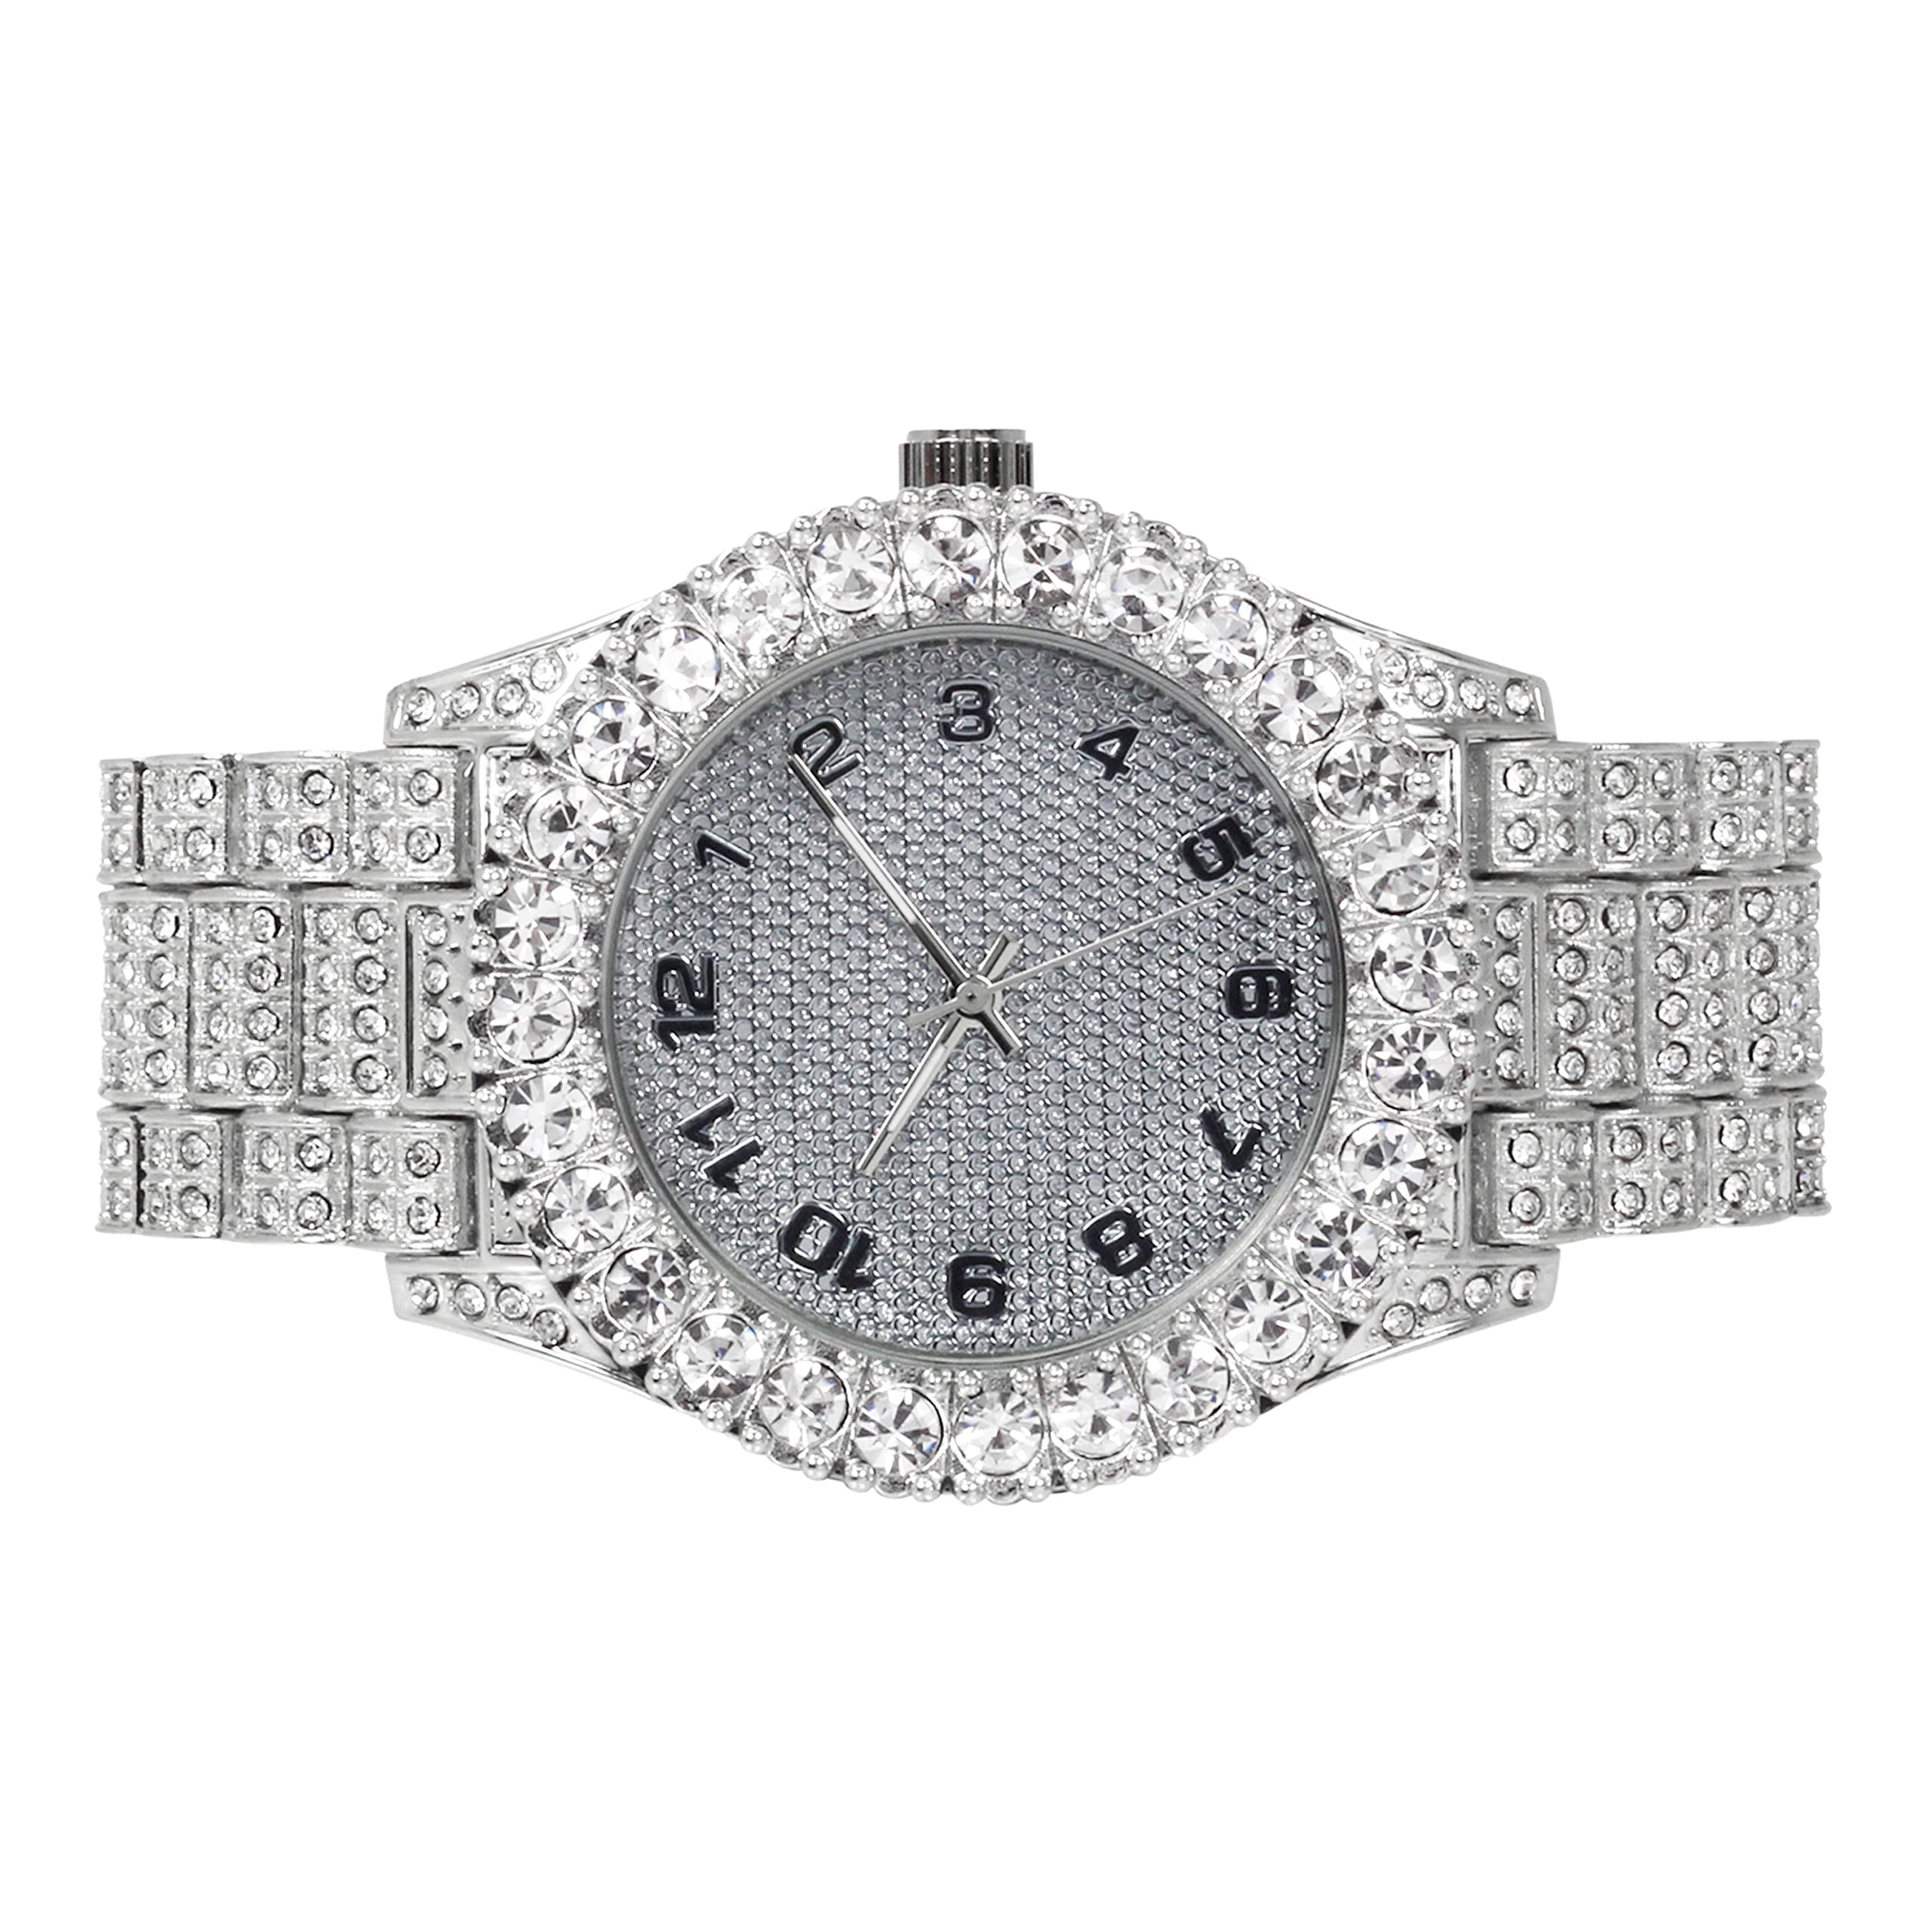 Luxury Mens 44mm Iced Diamond Solitaire Watch - Stunning Bling Dial & Bezel with Ravishing Crystals - 14k Gold, Silver, & Two-Tone Finish - Choose Numeral or Roman Dial - Watch, Bracelet & Chain Sets